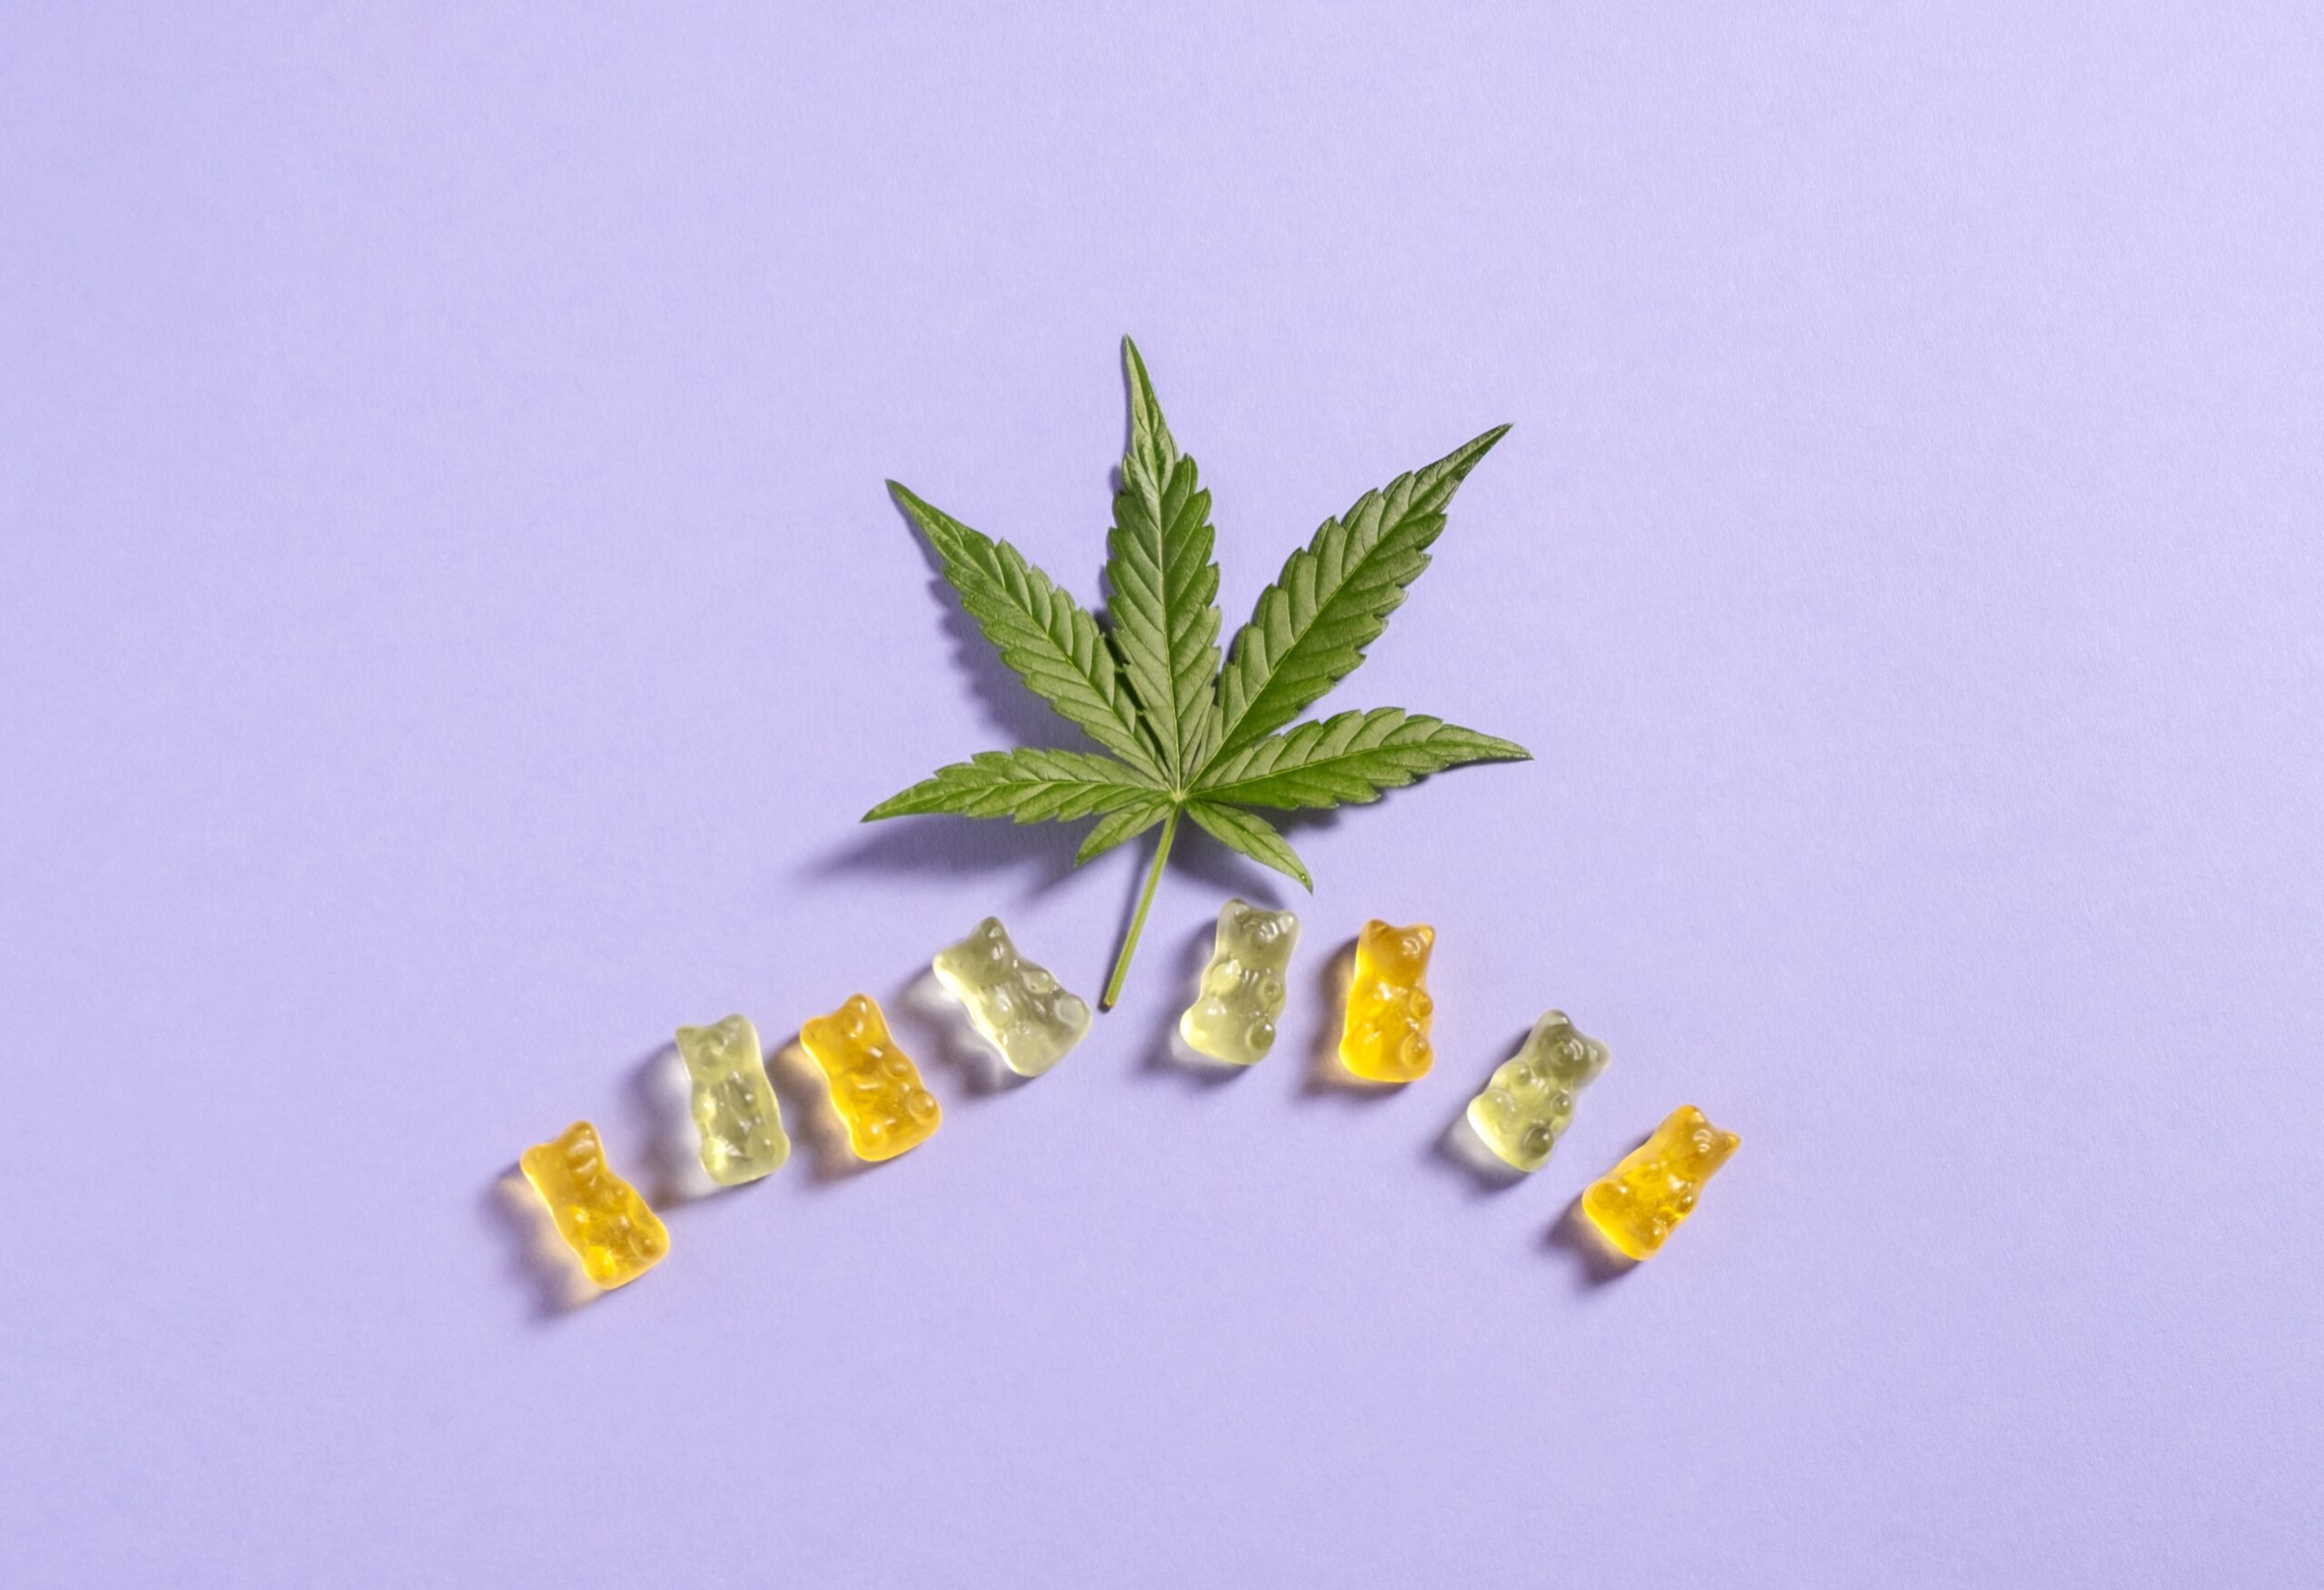 How do Cannabis Drinks Compare to Traditional Edibles?